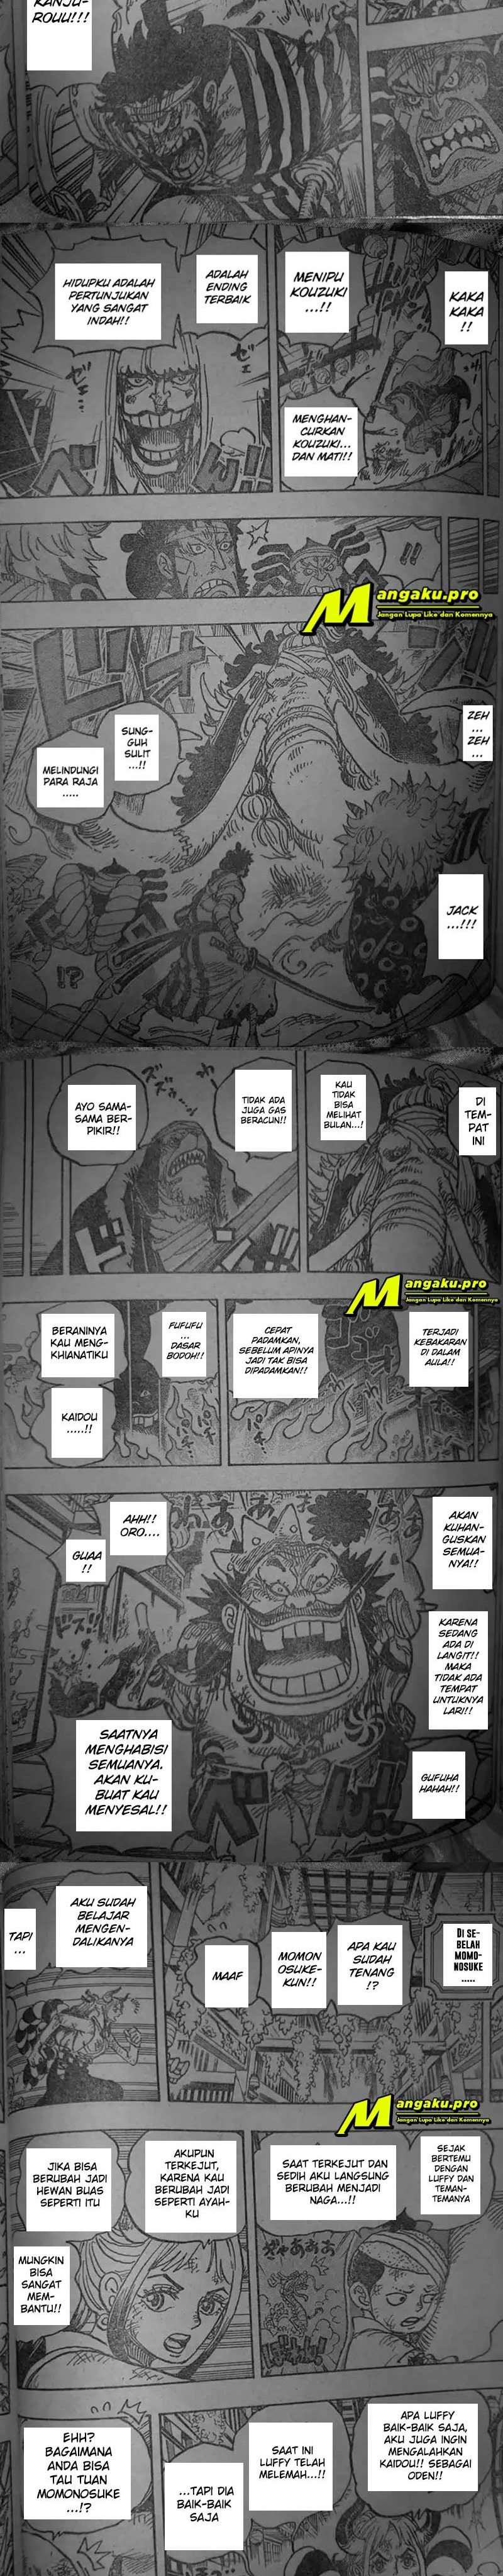 One Piece Chapter 1008 lq